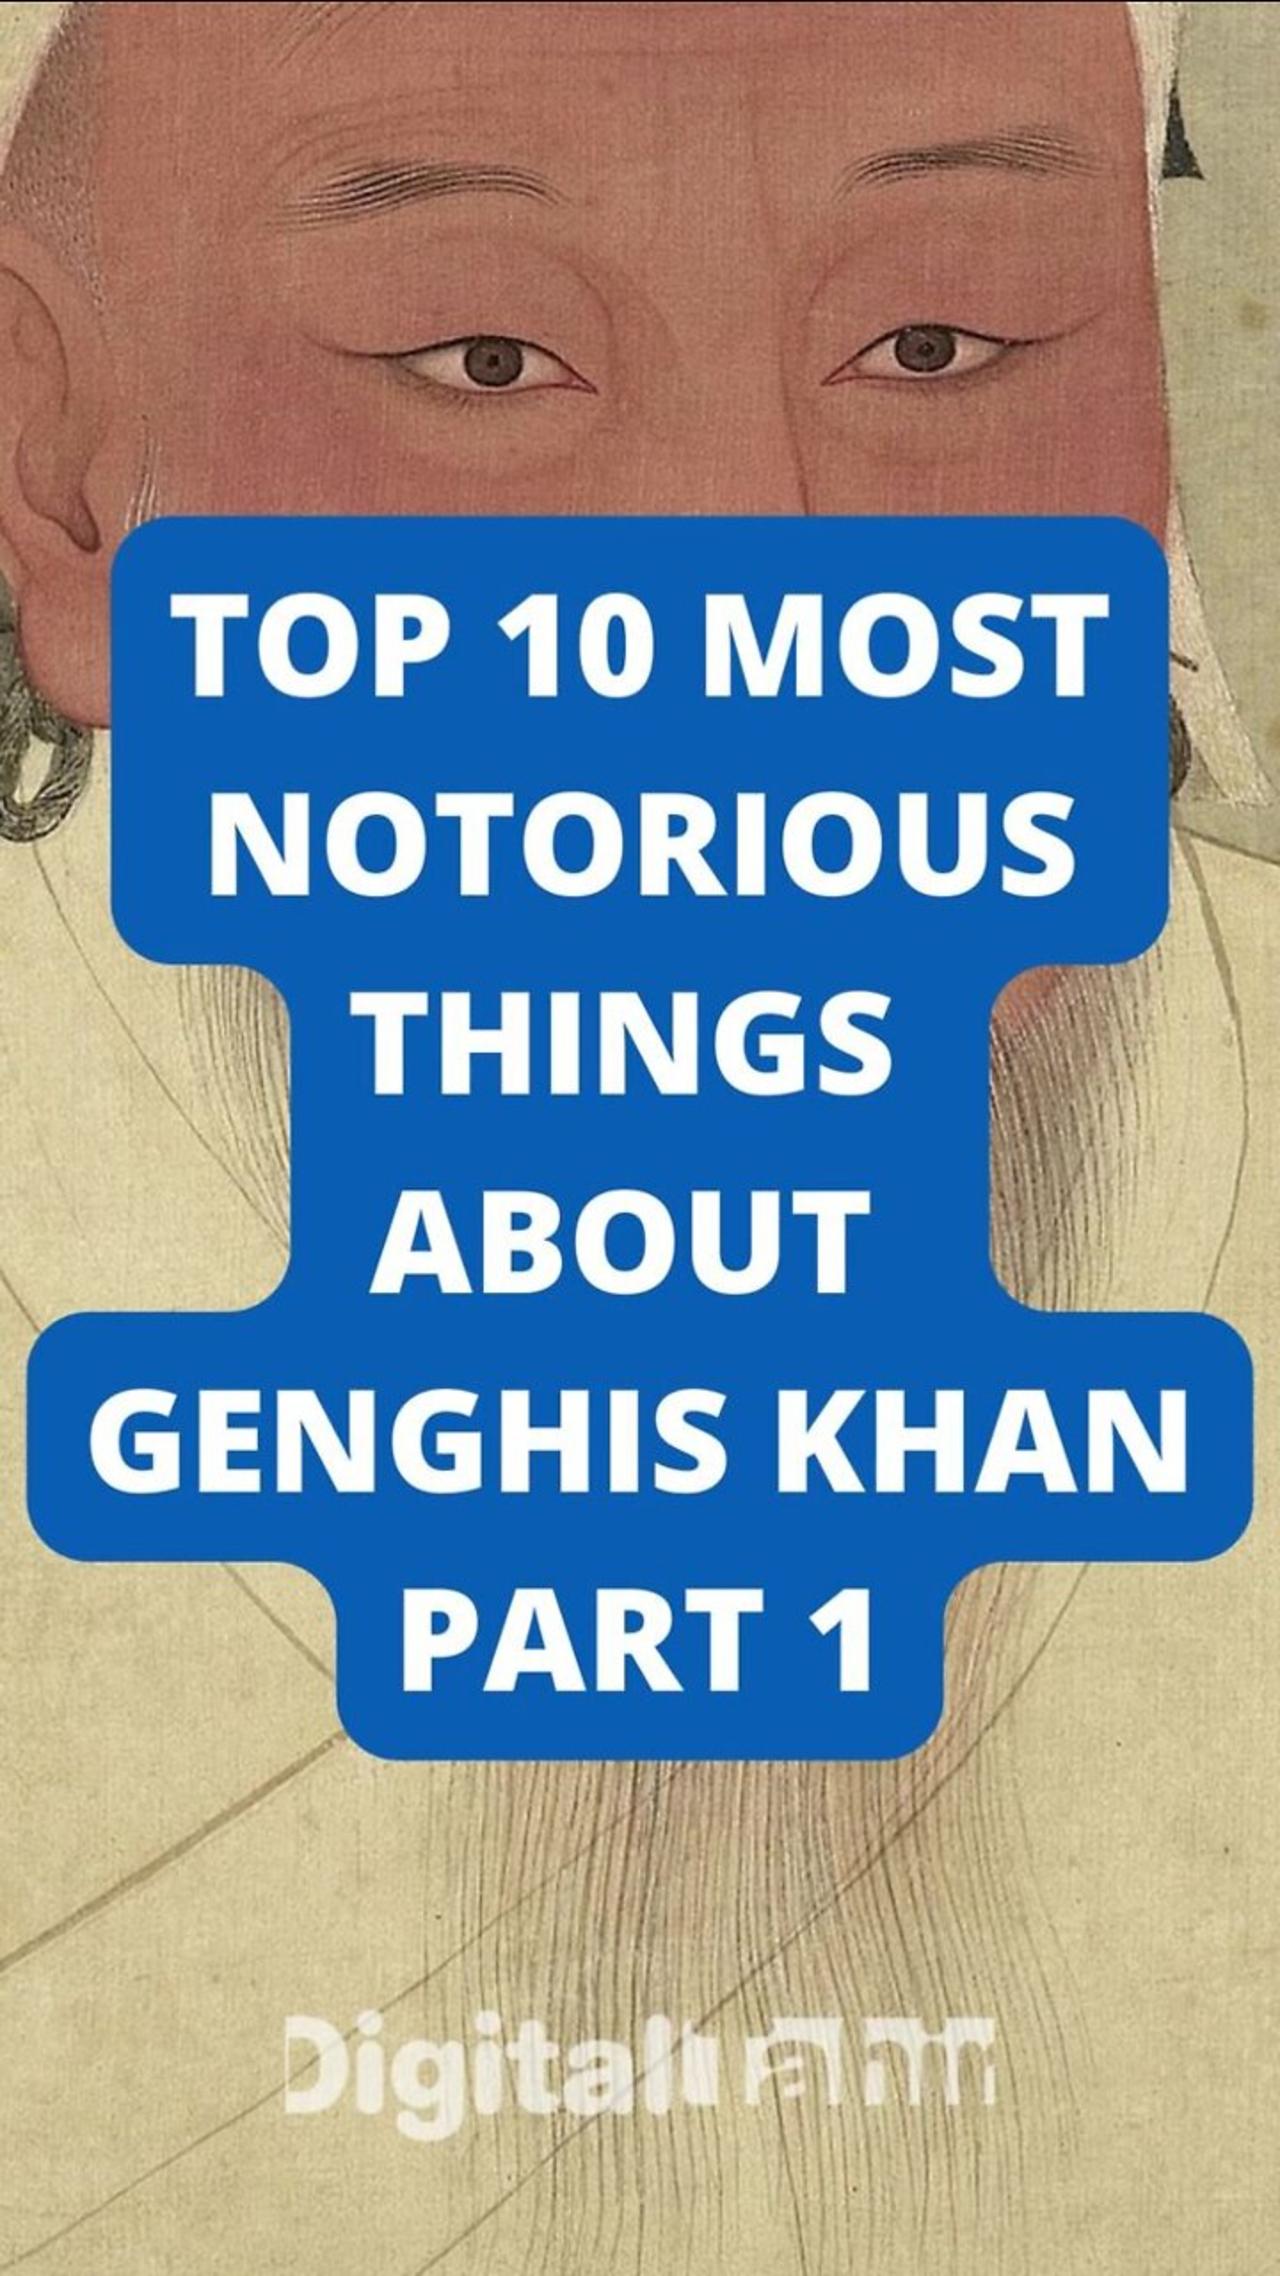 Top 10 Most Notorious Things About Genghis Khan Part 1